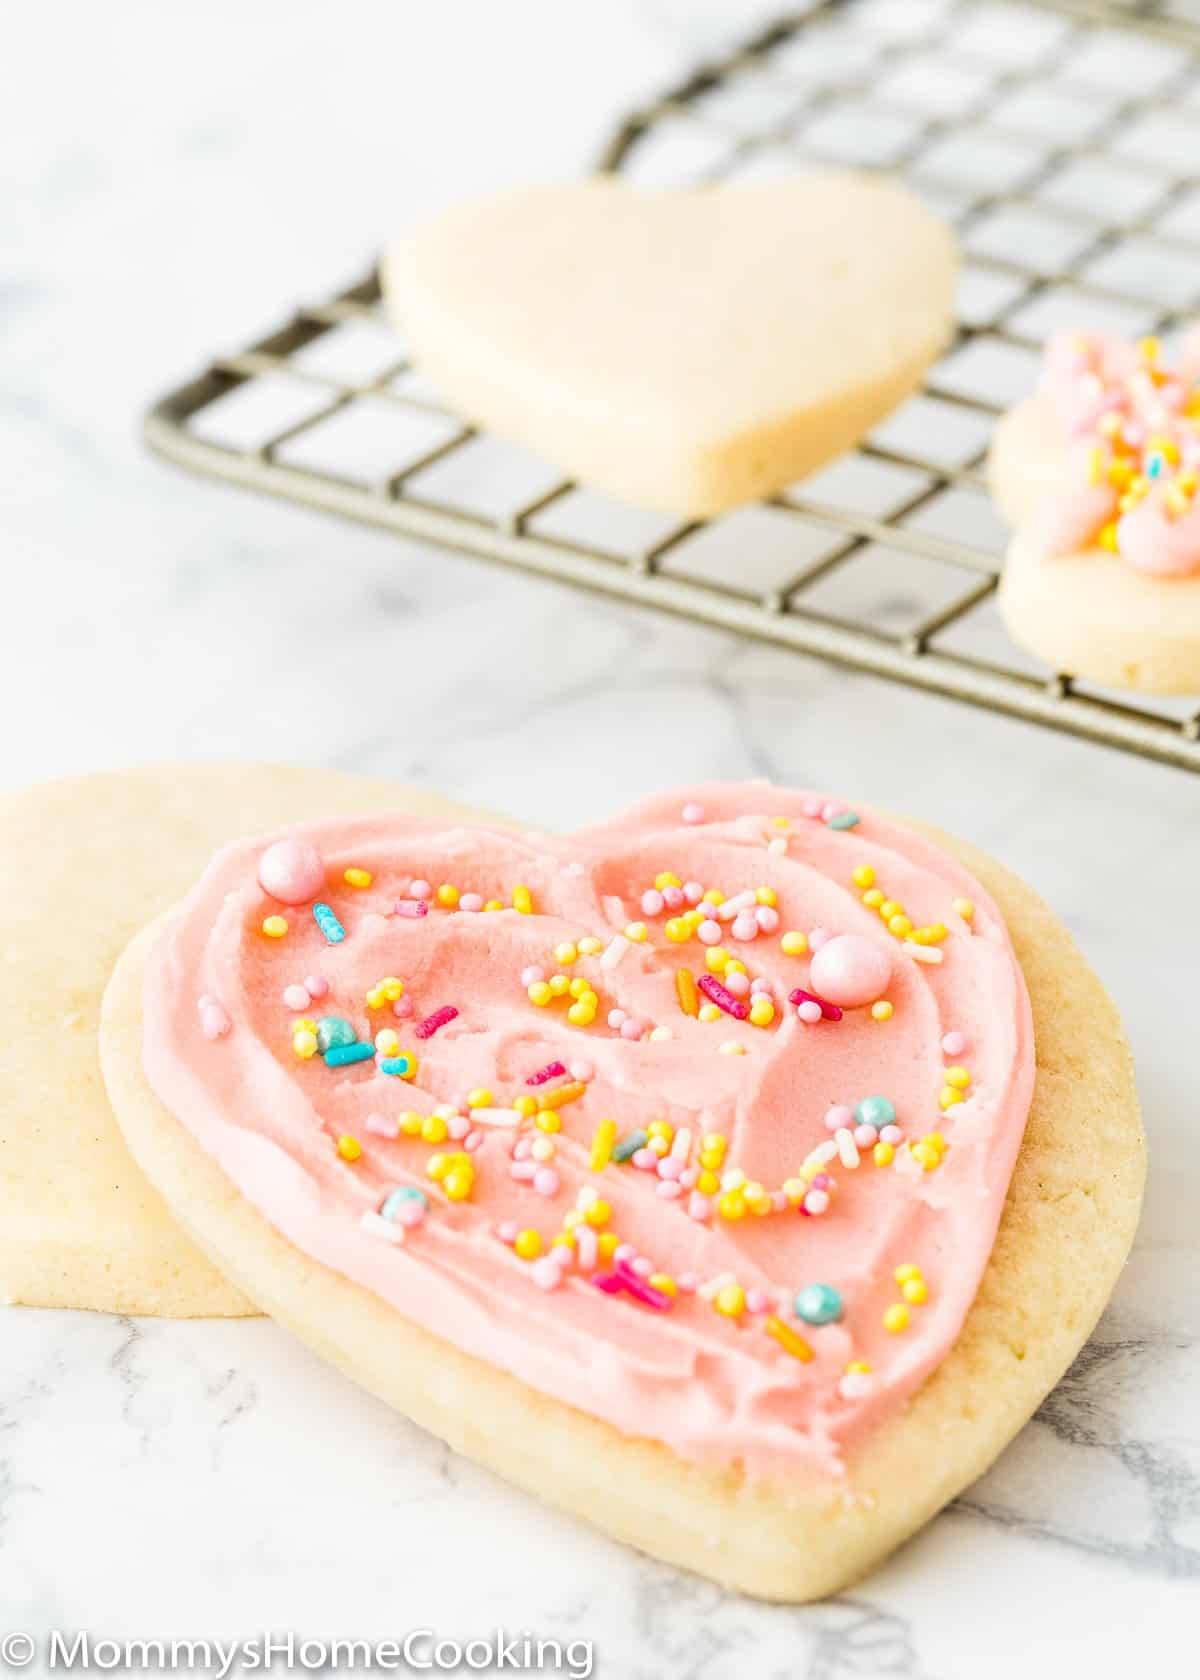 Eggless Sugar Cookie with buttercream an sprinkles.